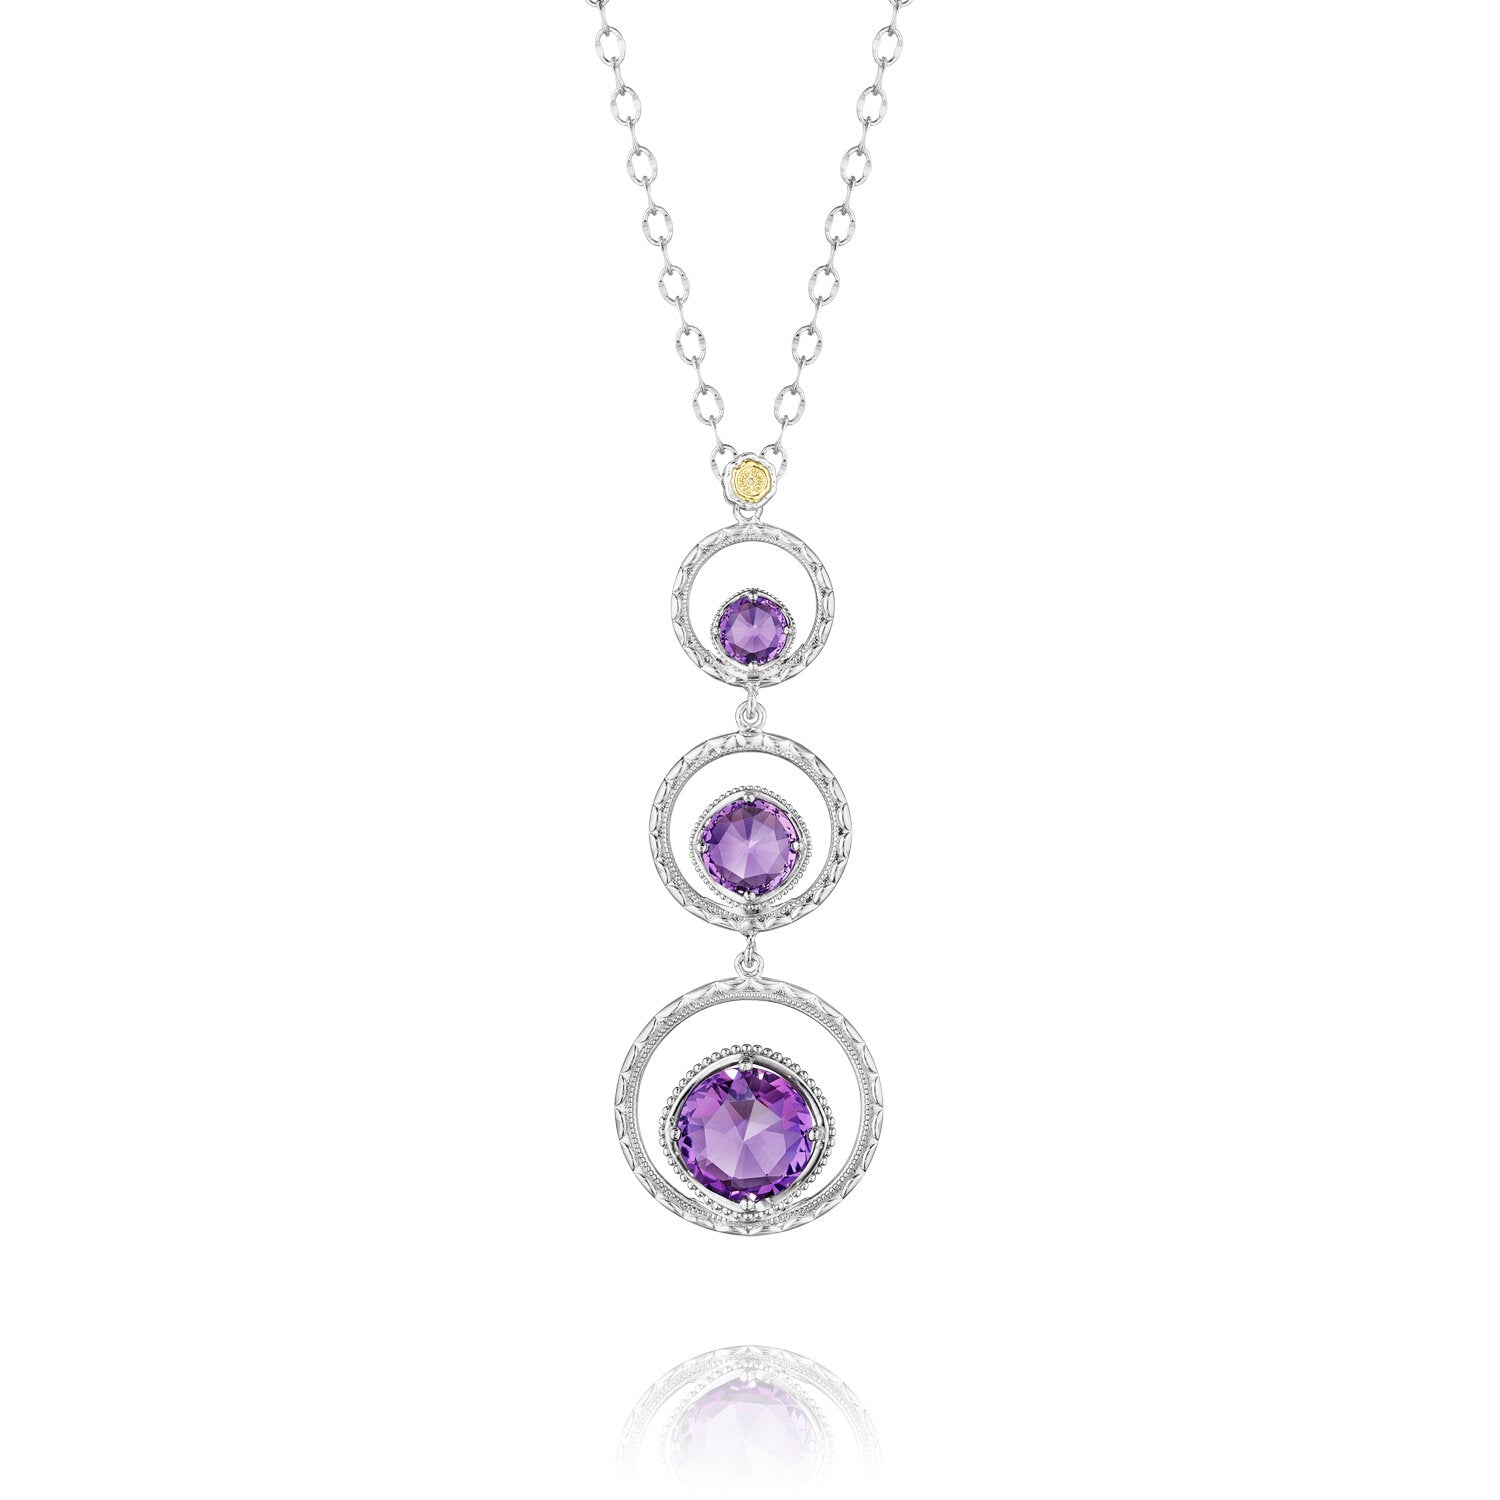 TACORI Skipping Stone Necklace featuring Amethyst Ref# SN14501